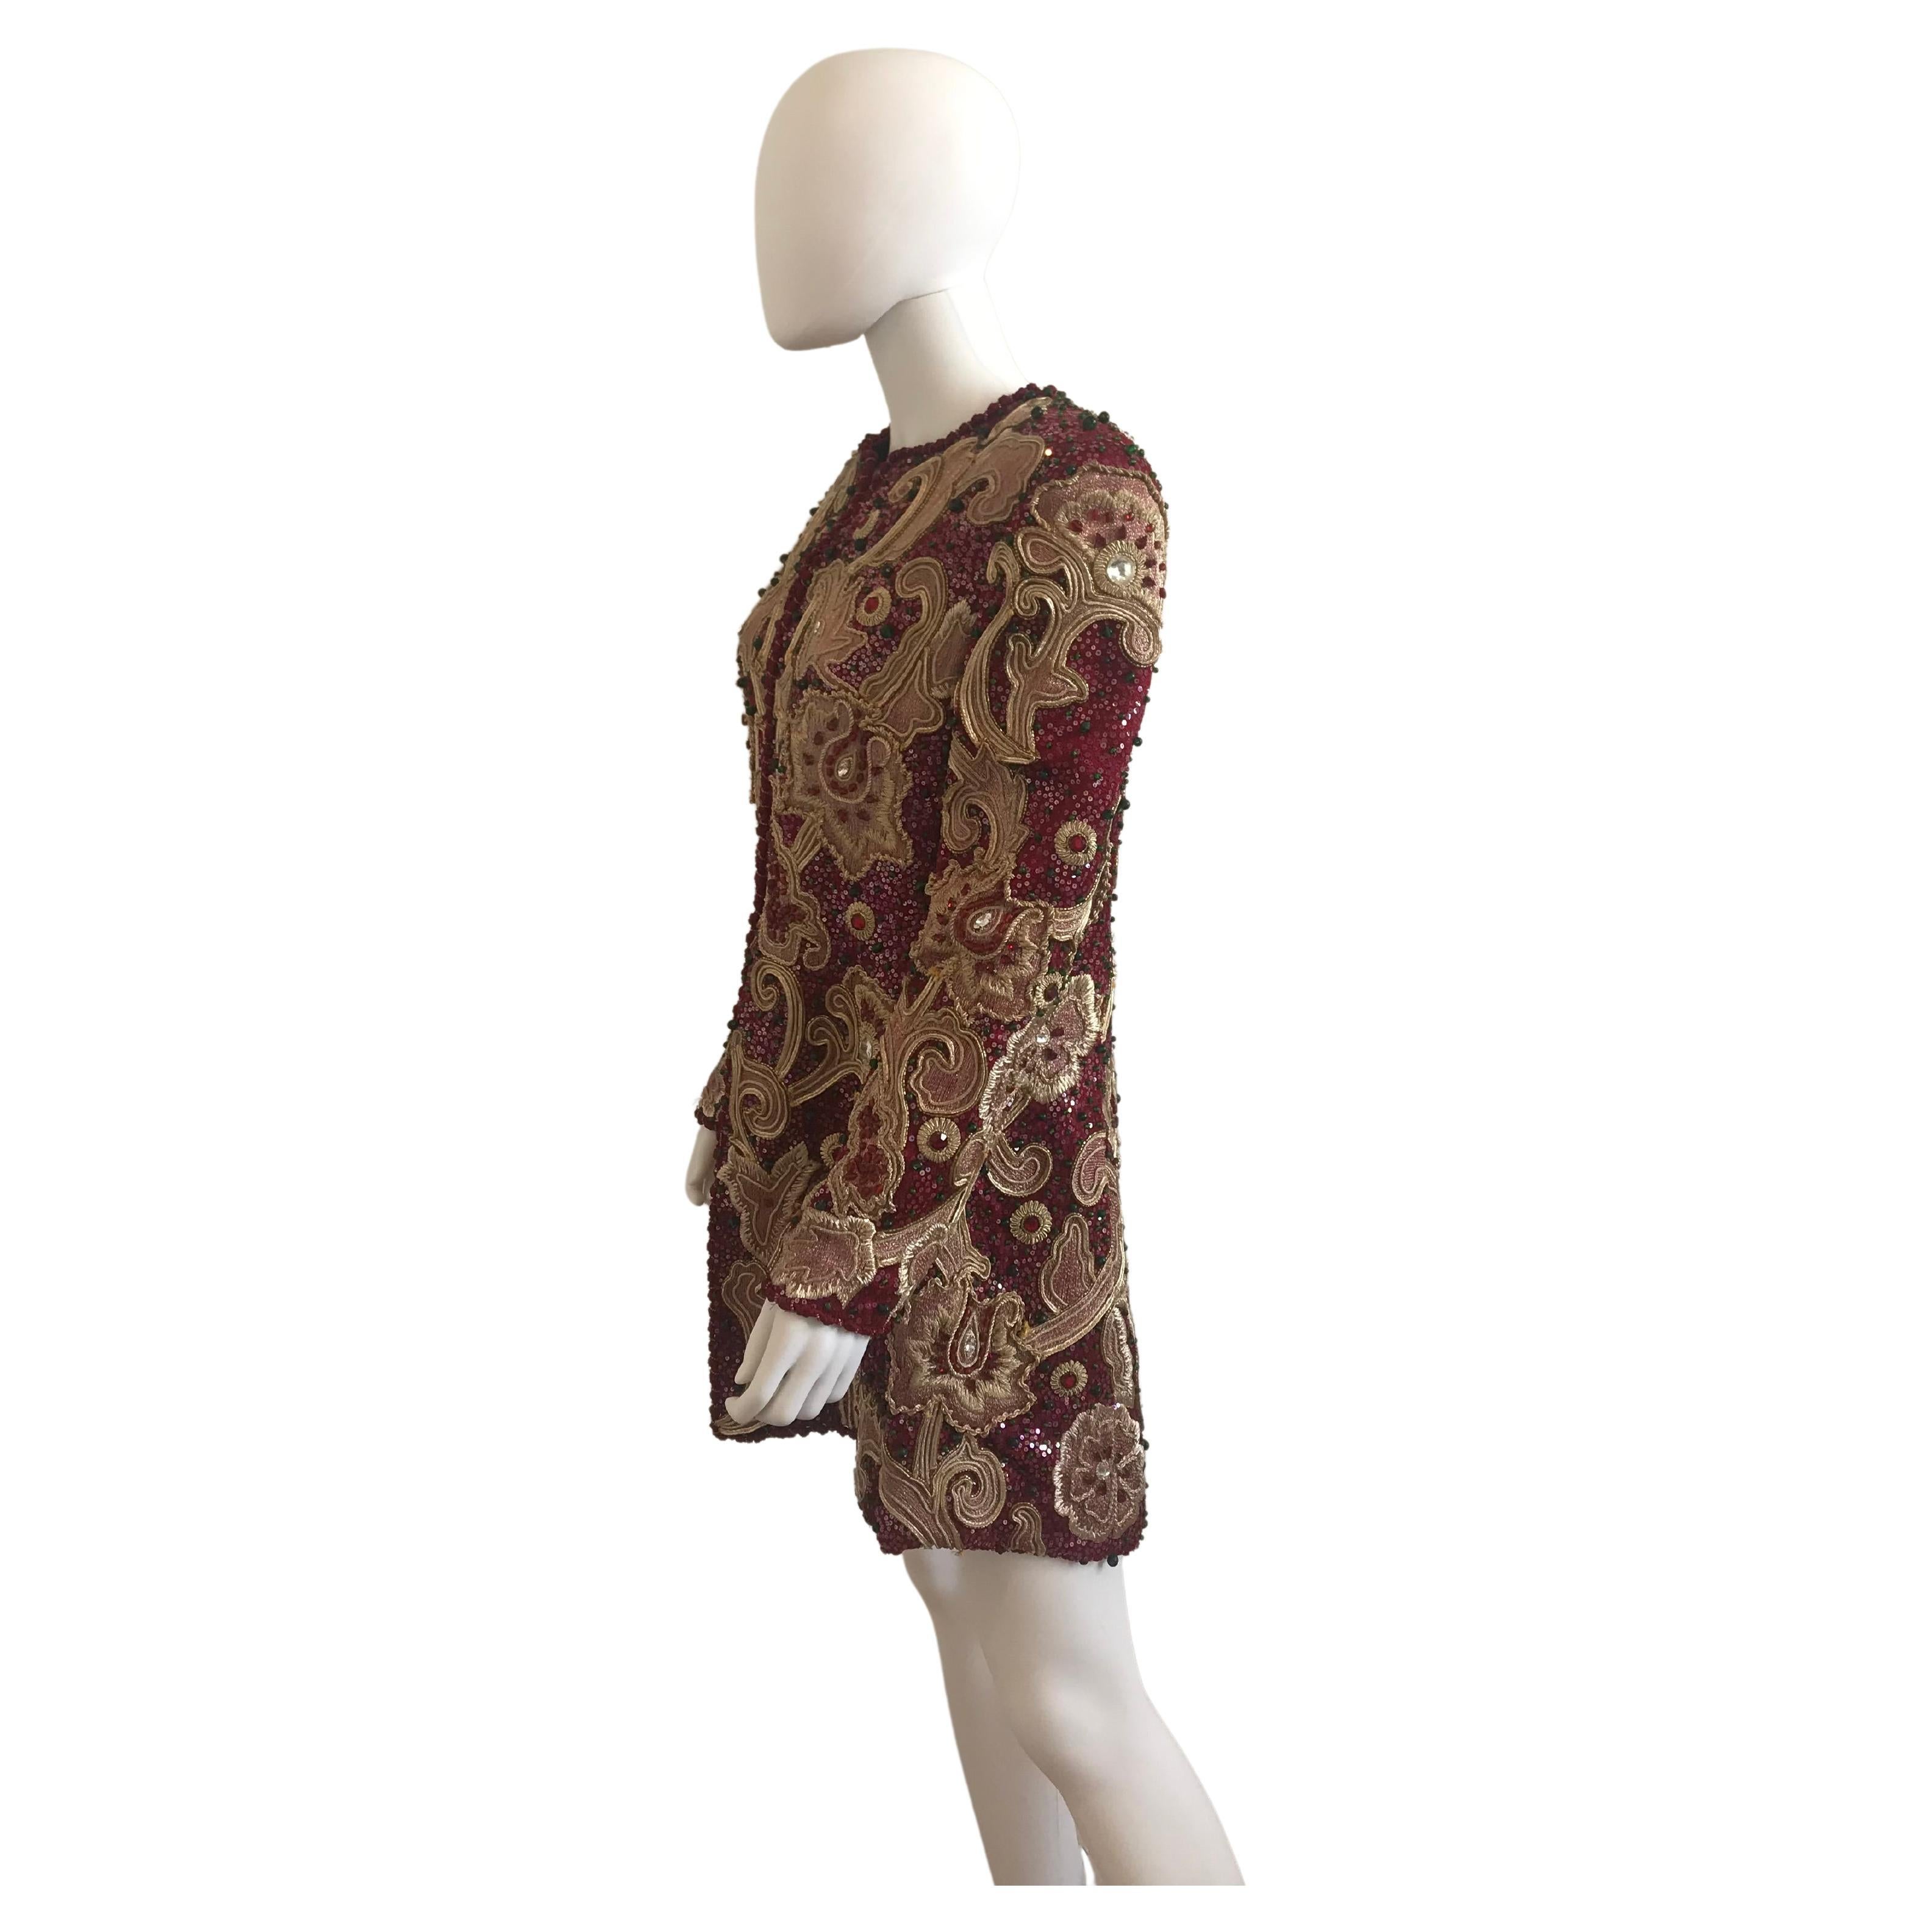 Beautiful 1980's-90's Mary McFadden Floral and Brocade Evening Coat. Burgundy, Gold, and emerald bead detailing. Zip closure in the front. Size US 10. Silk interior. Original Pristine Condition. 